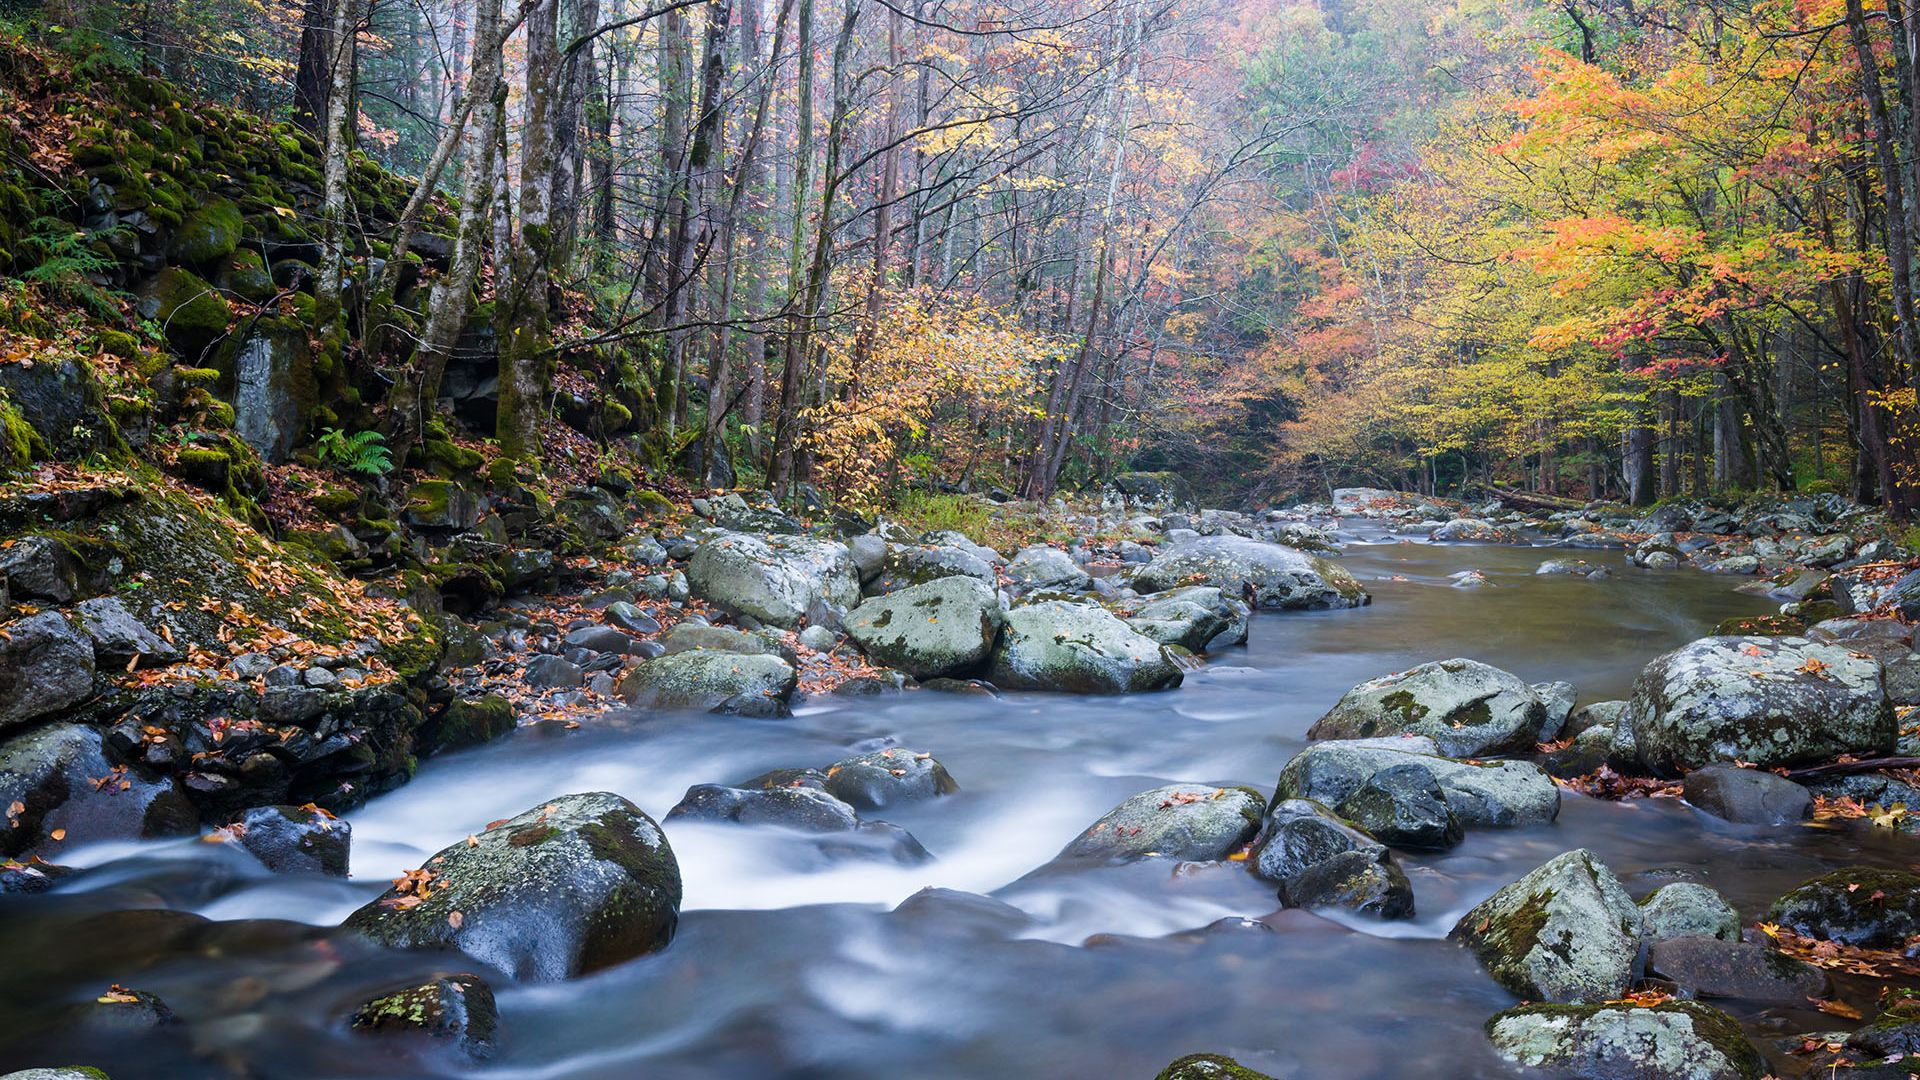 The Little River in Tennessee is the perfect place to go fishing near Gatlinburg